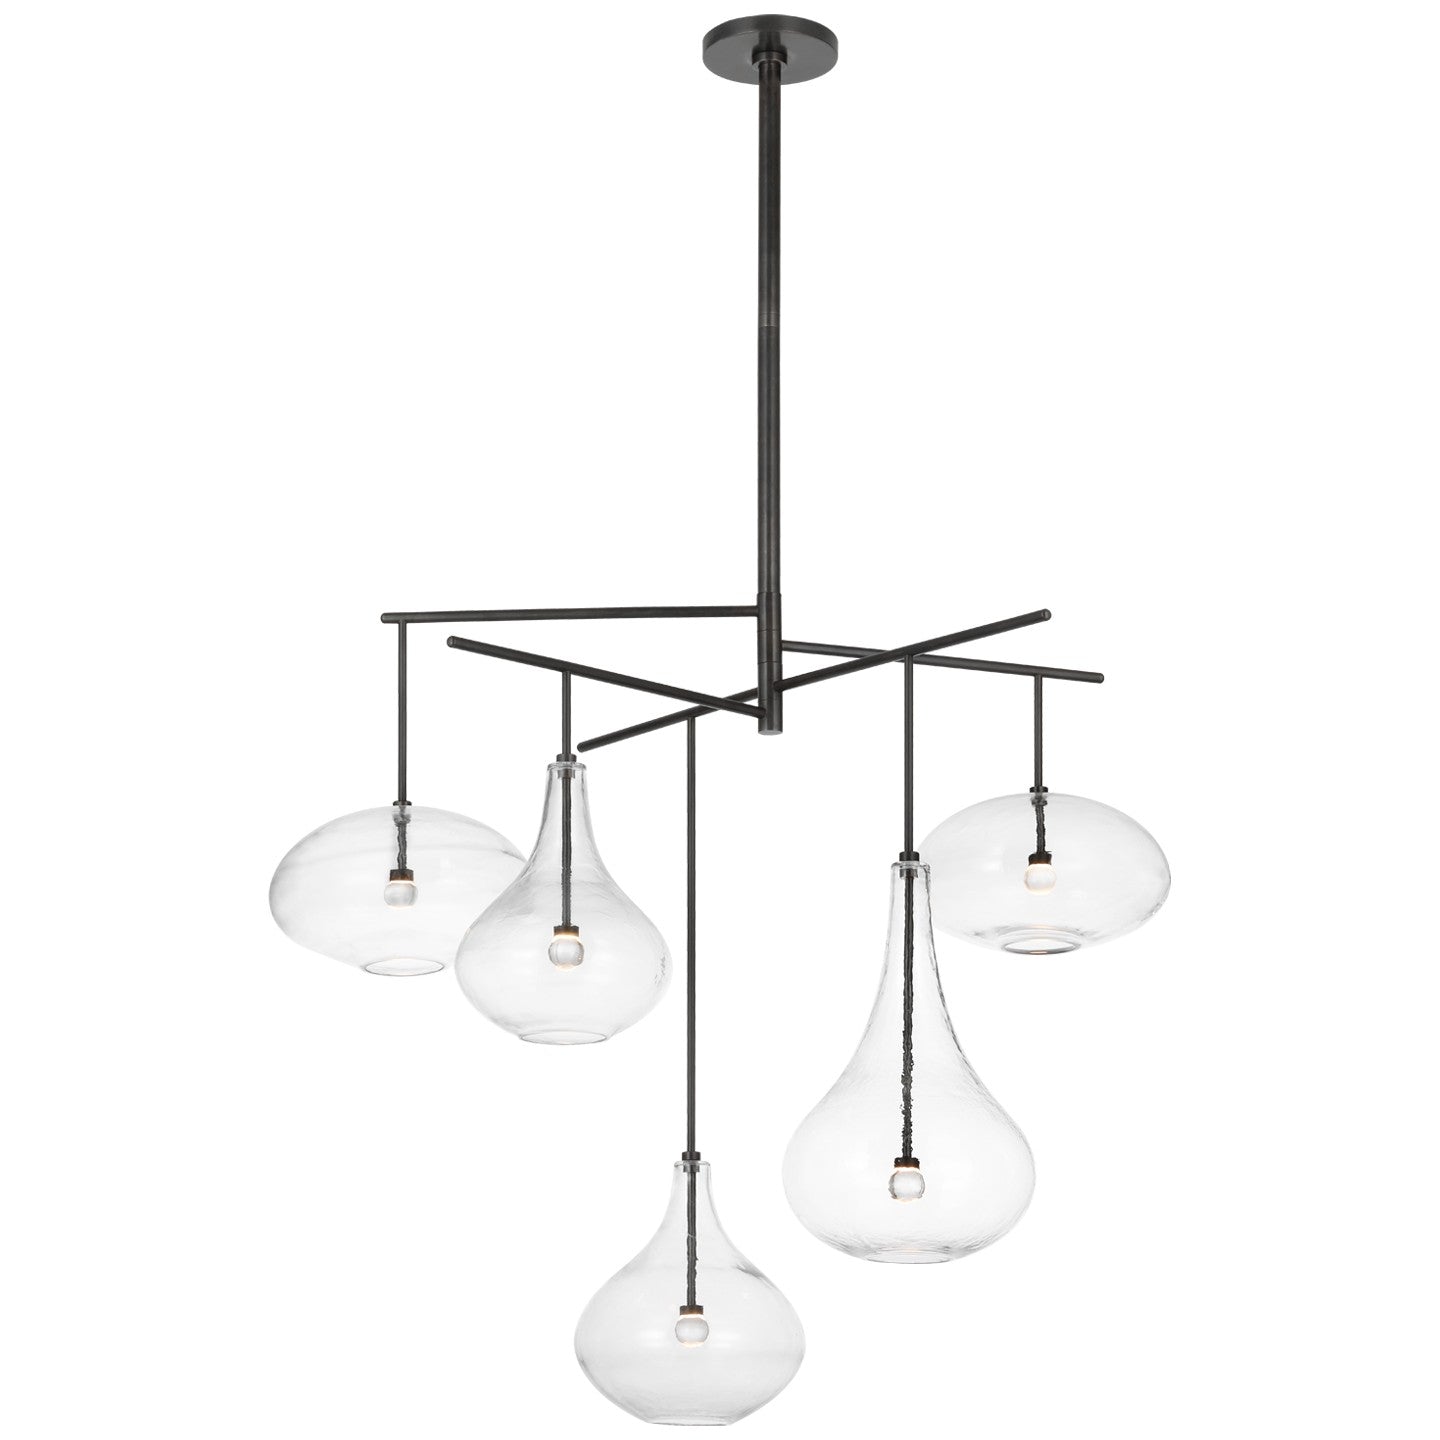 Visual Comfort Signature Lomme XL Chandelier in Soft Brass by Champilamaud